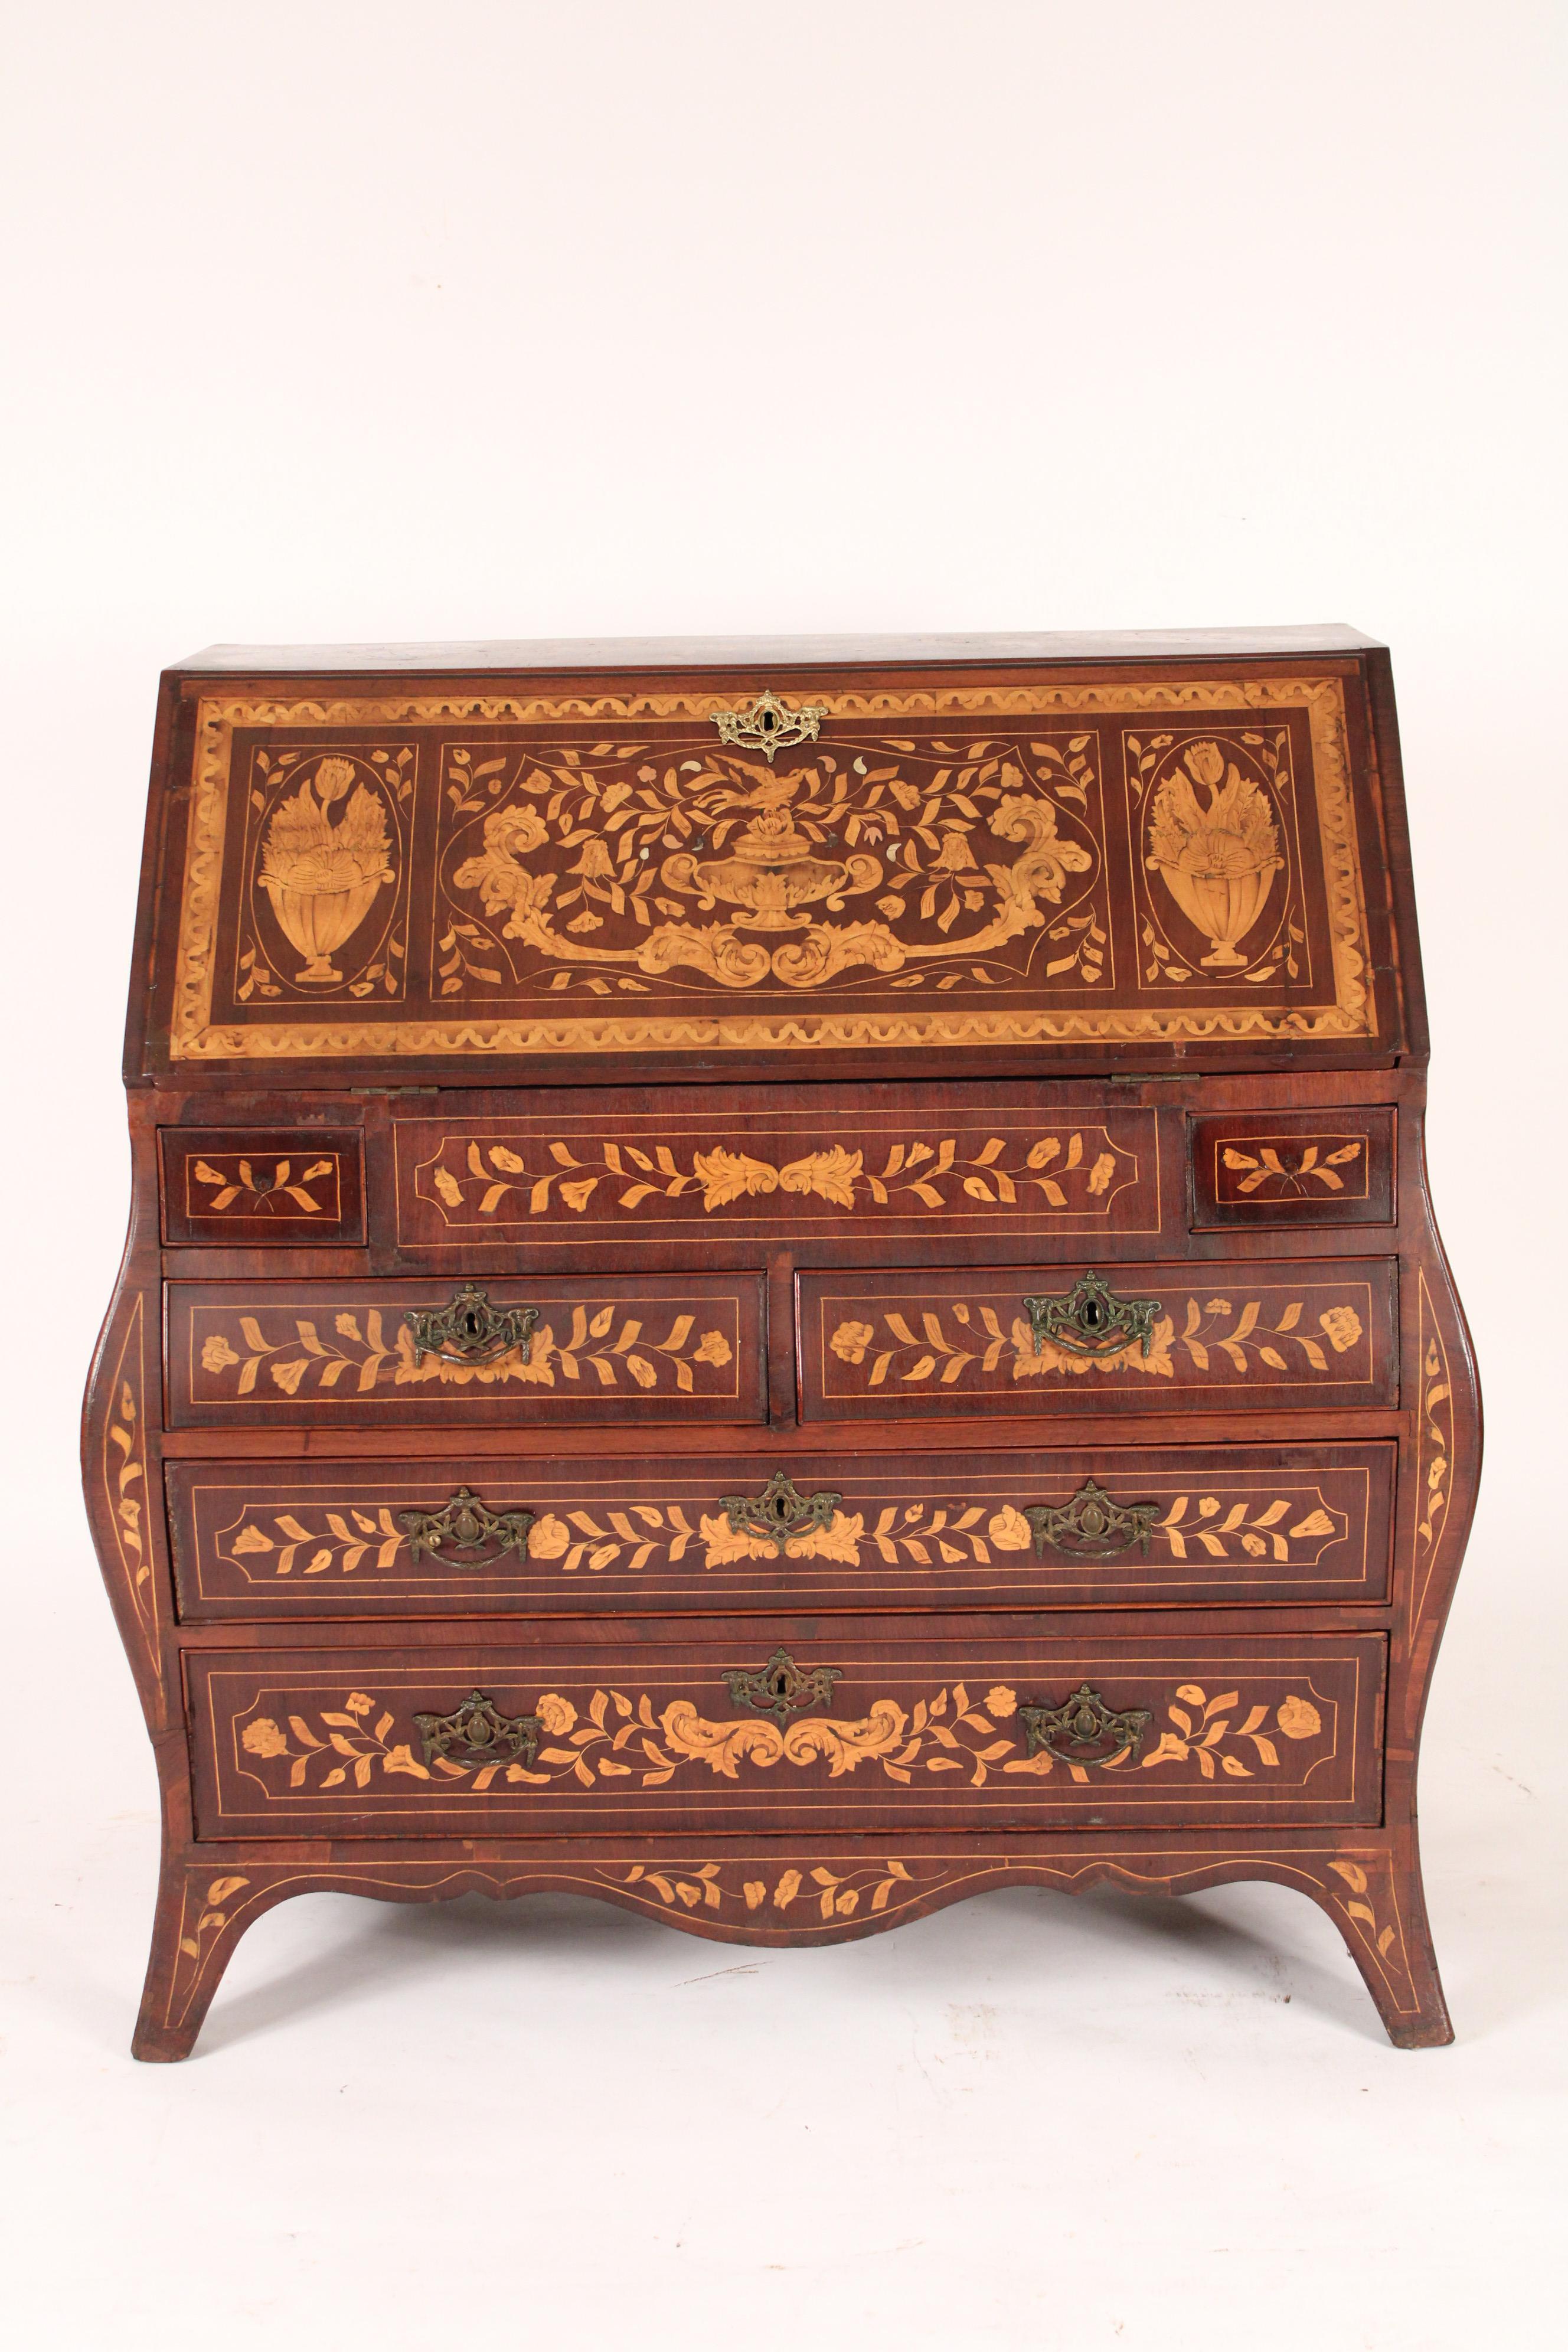 Dutch marquetry bombe form slant top desk, late 19th century. With exquisite floral marquetry throughout, stepped interior and hand dovetailed drawer construction.